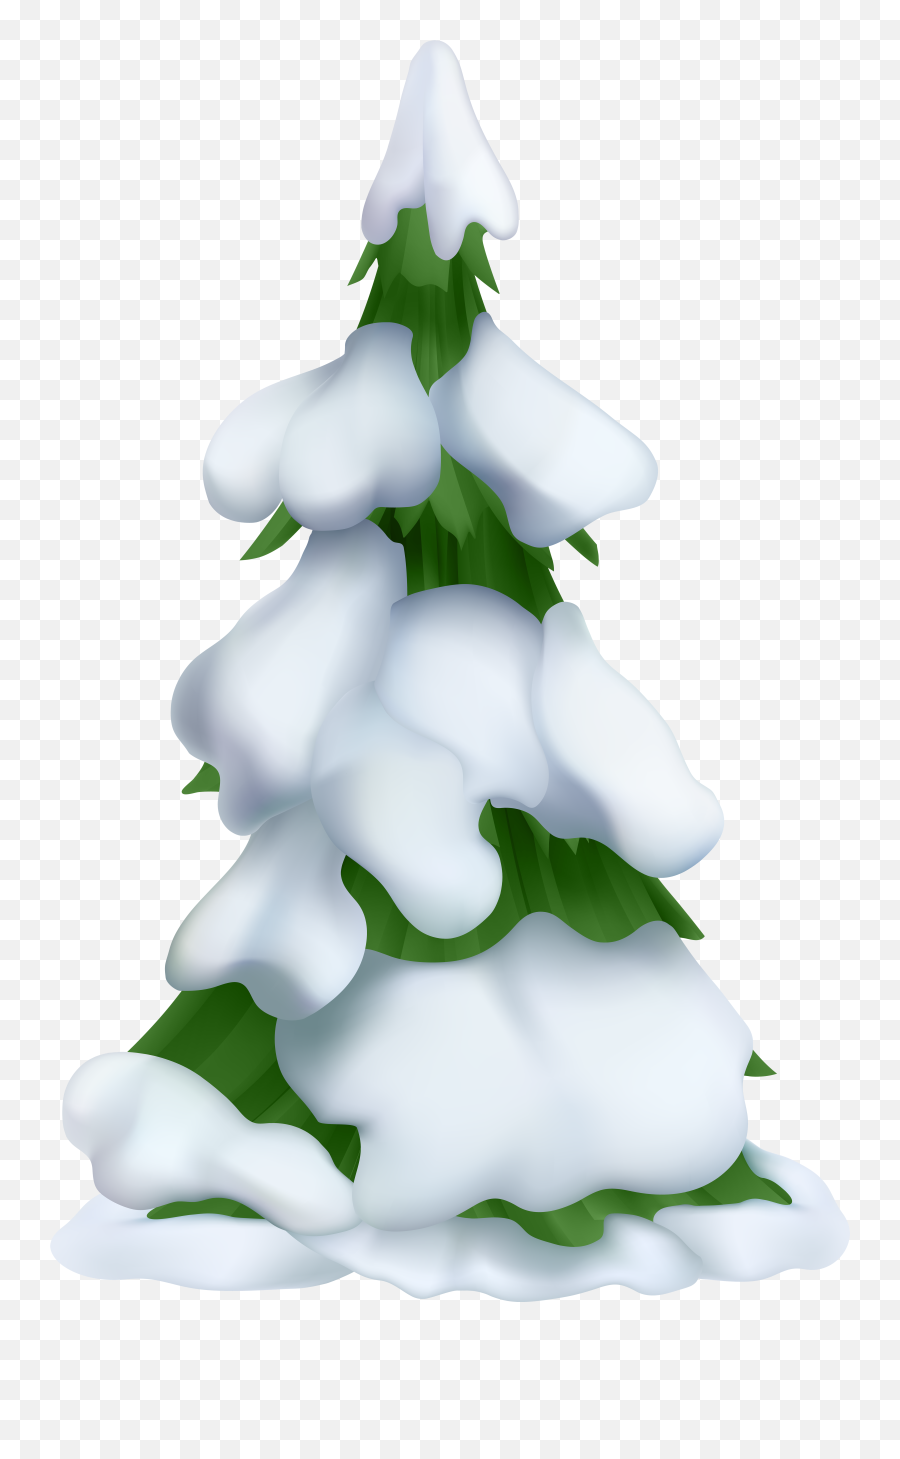 Winter Snow Snowy Cold Png Images 36png Snipstock Emoji,Snowing Emoticon Imange